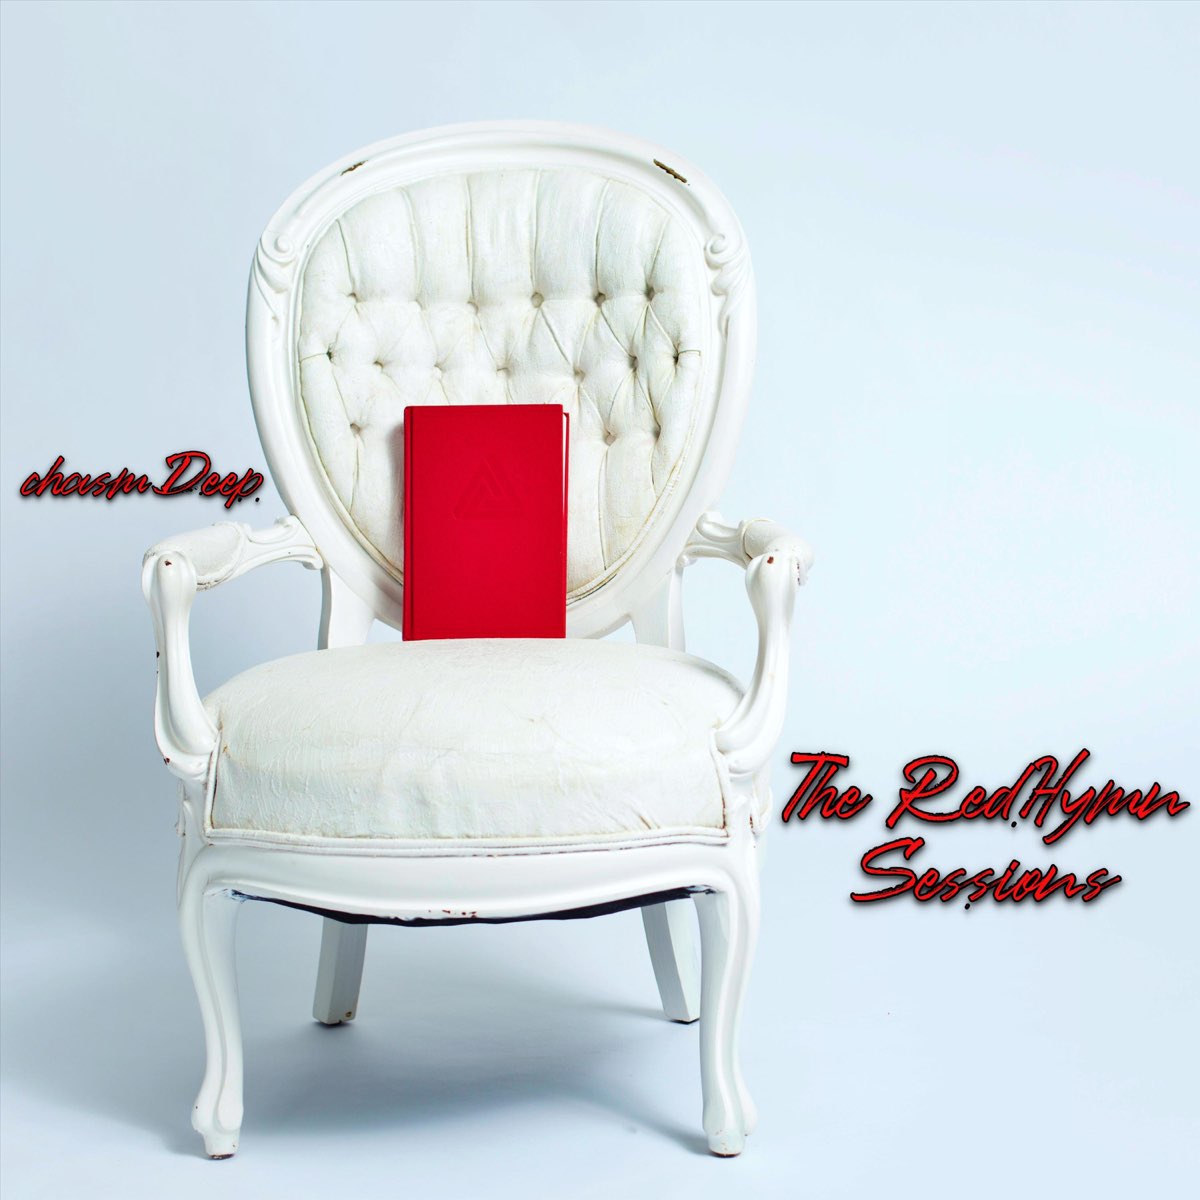 The Redhymn Sessions - EP by Chasm Deep on Apple Music